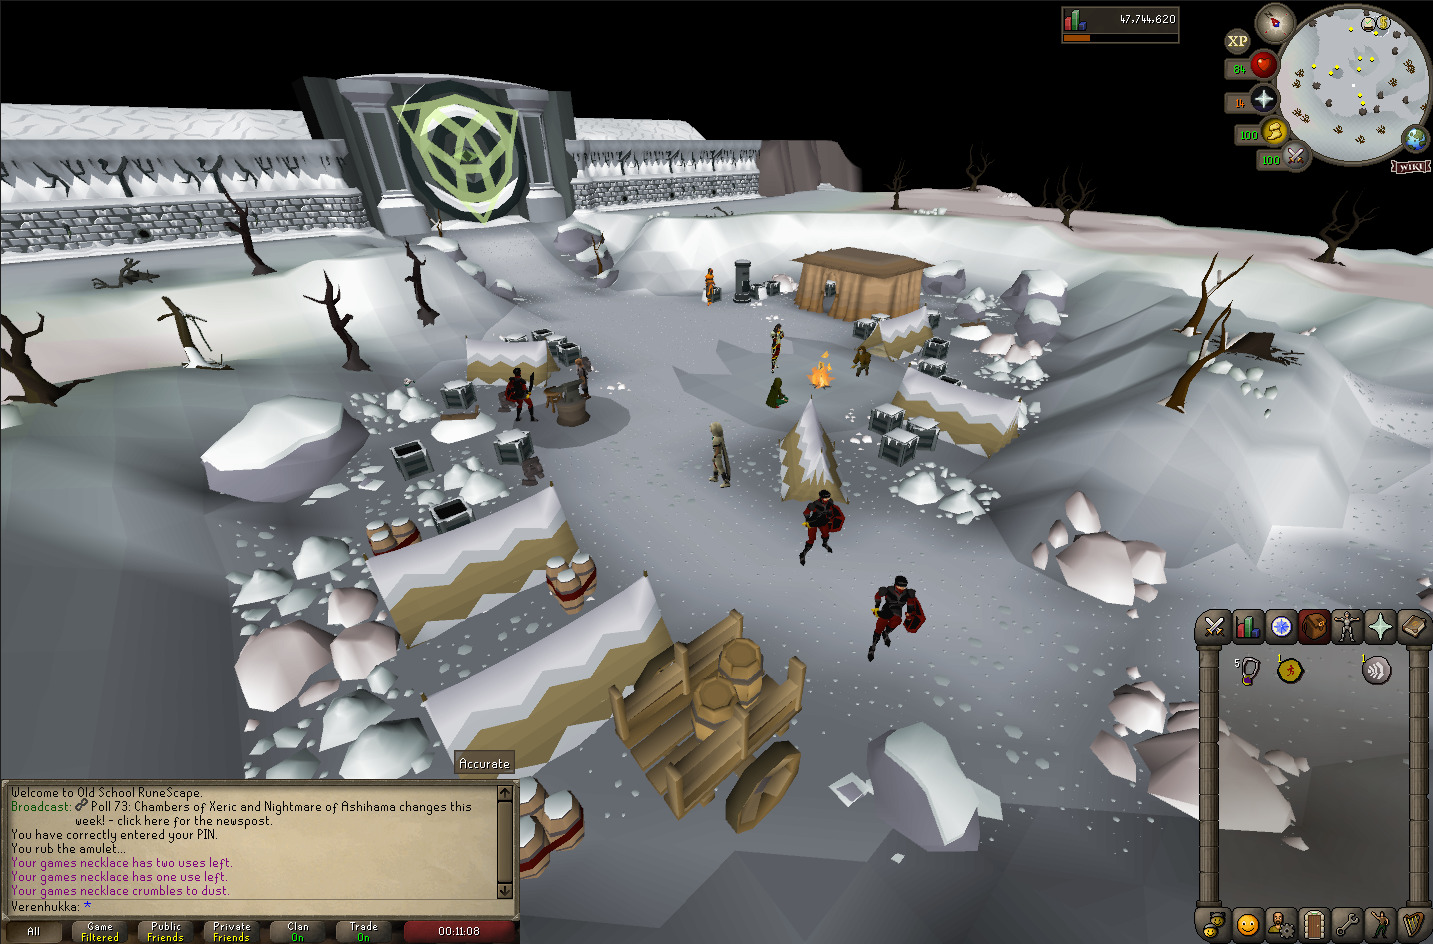 Nostalgic MMO Old School RuneScape is coming to Steam in February